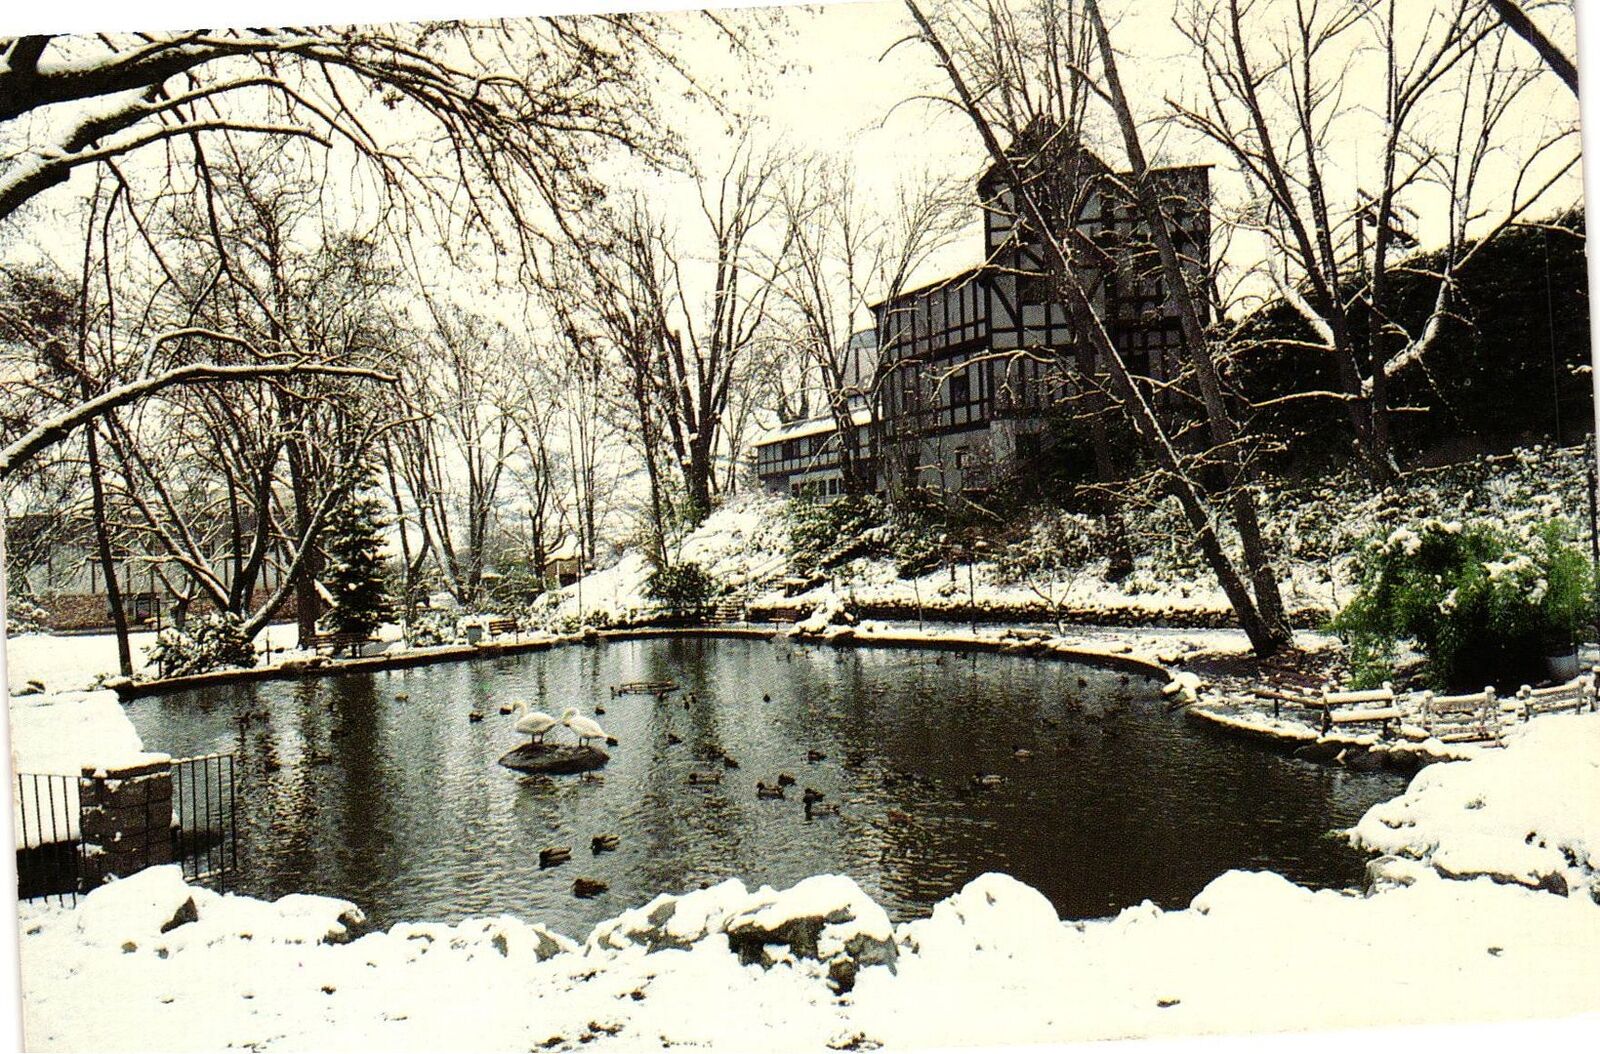 Vintage Postcard 4x6- LOWER DUCK POND AND SHAKESPEAR THEATER, LITHIA PARK, ASHLA